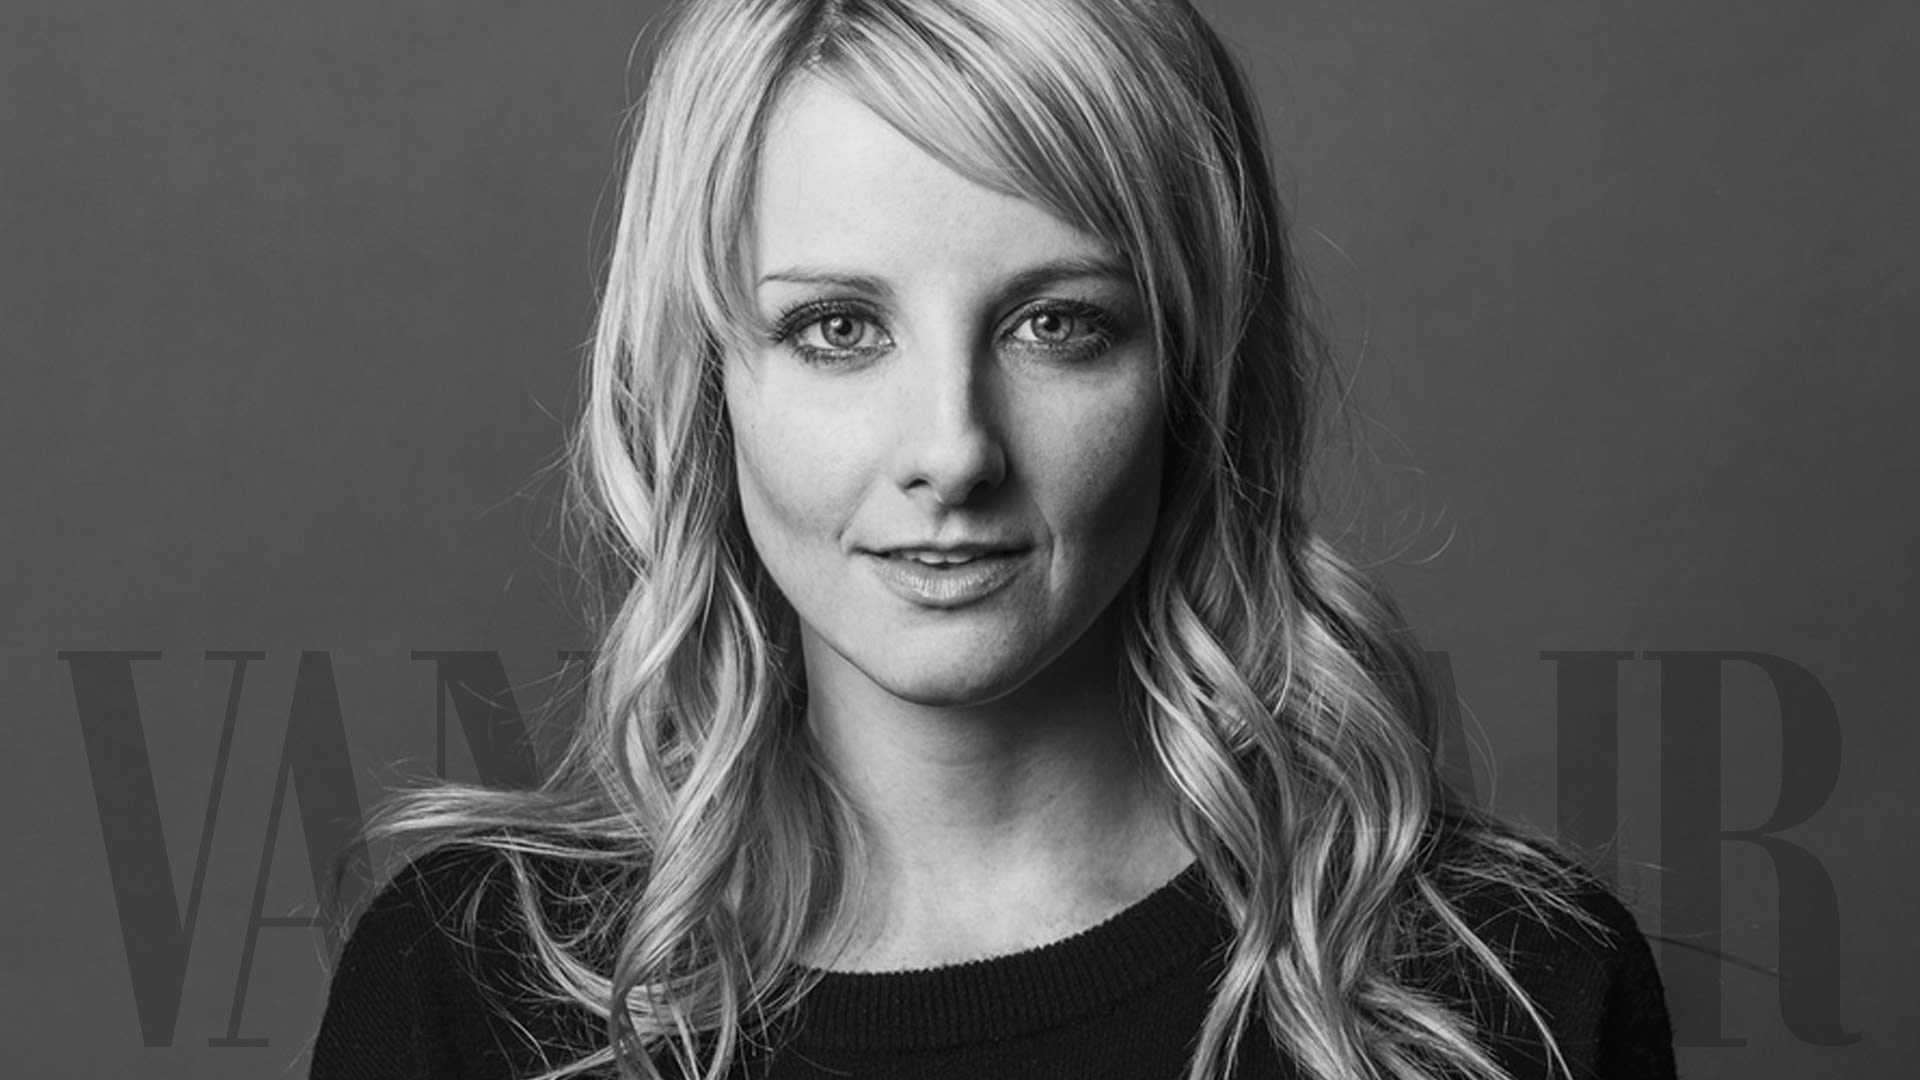 dick breese reccomend melissa rauch photo shoot pic